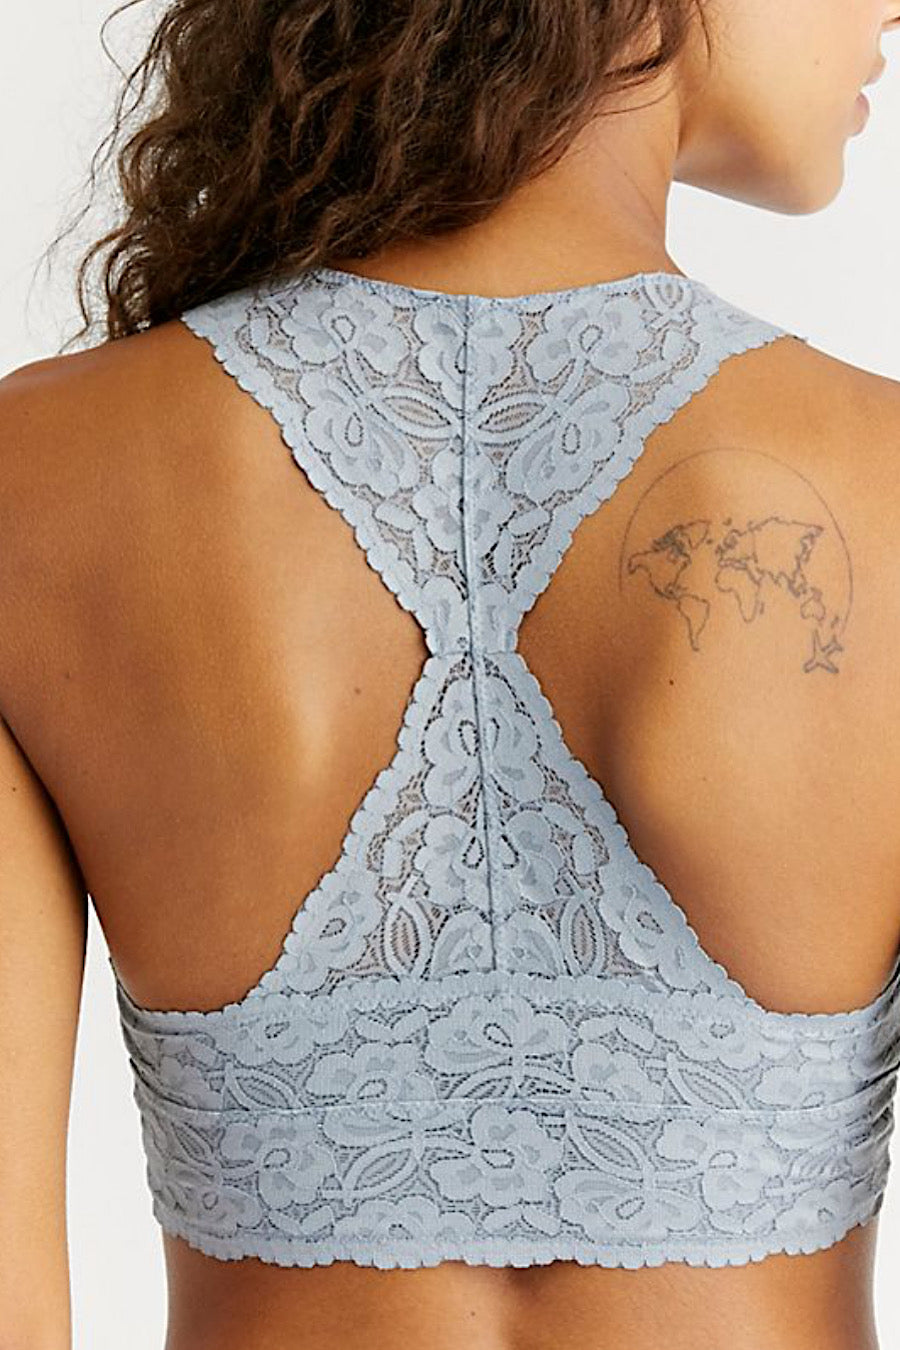 FREE PEOPLE Galloon Lace Racerback Bralette - OFFWHITE